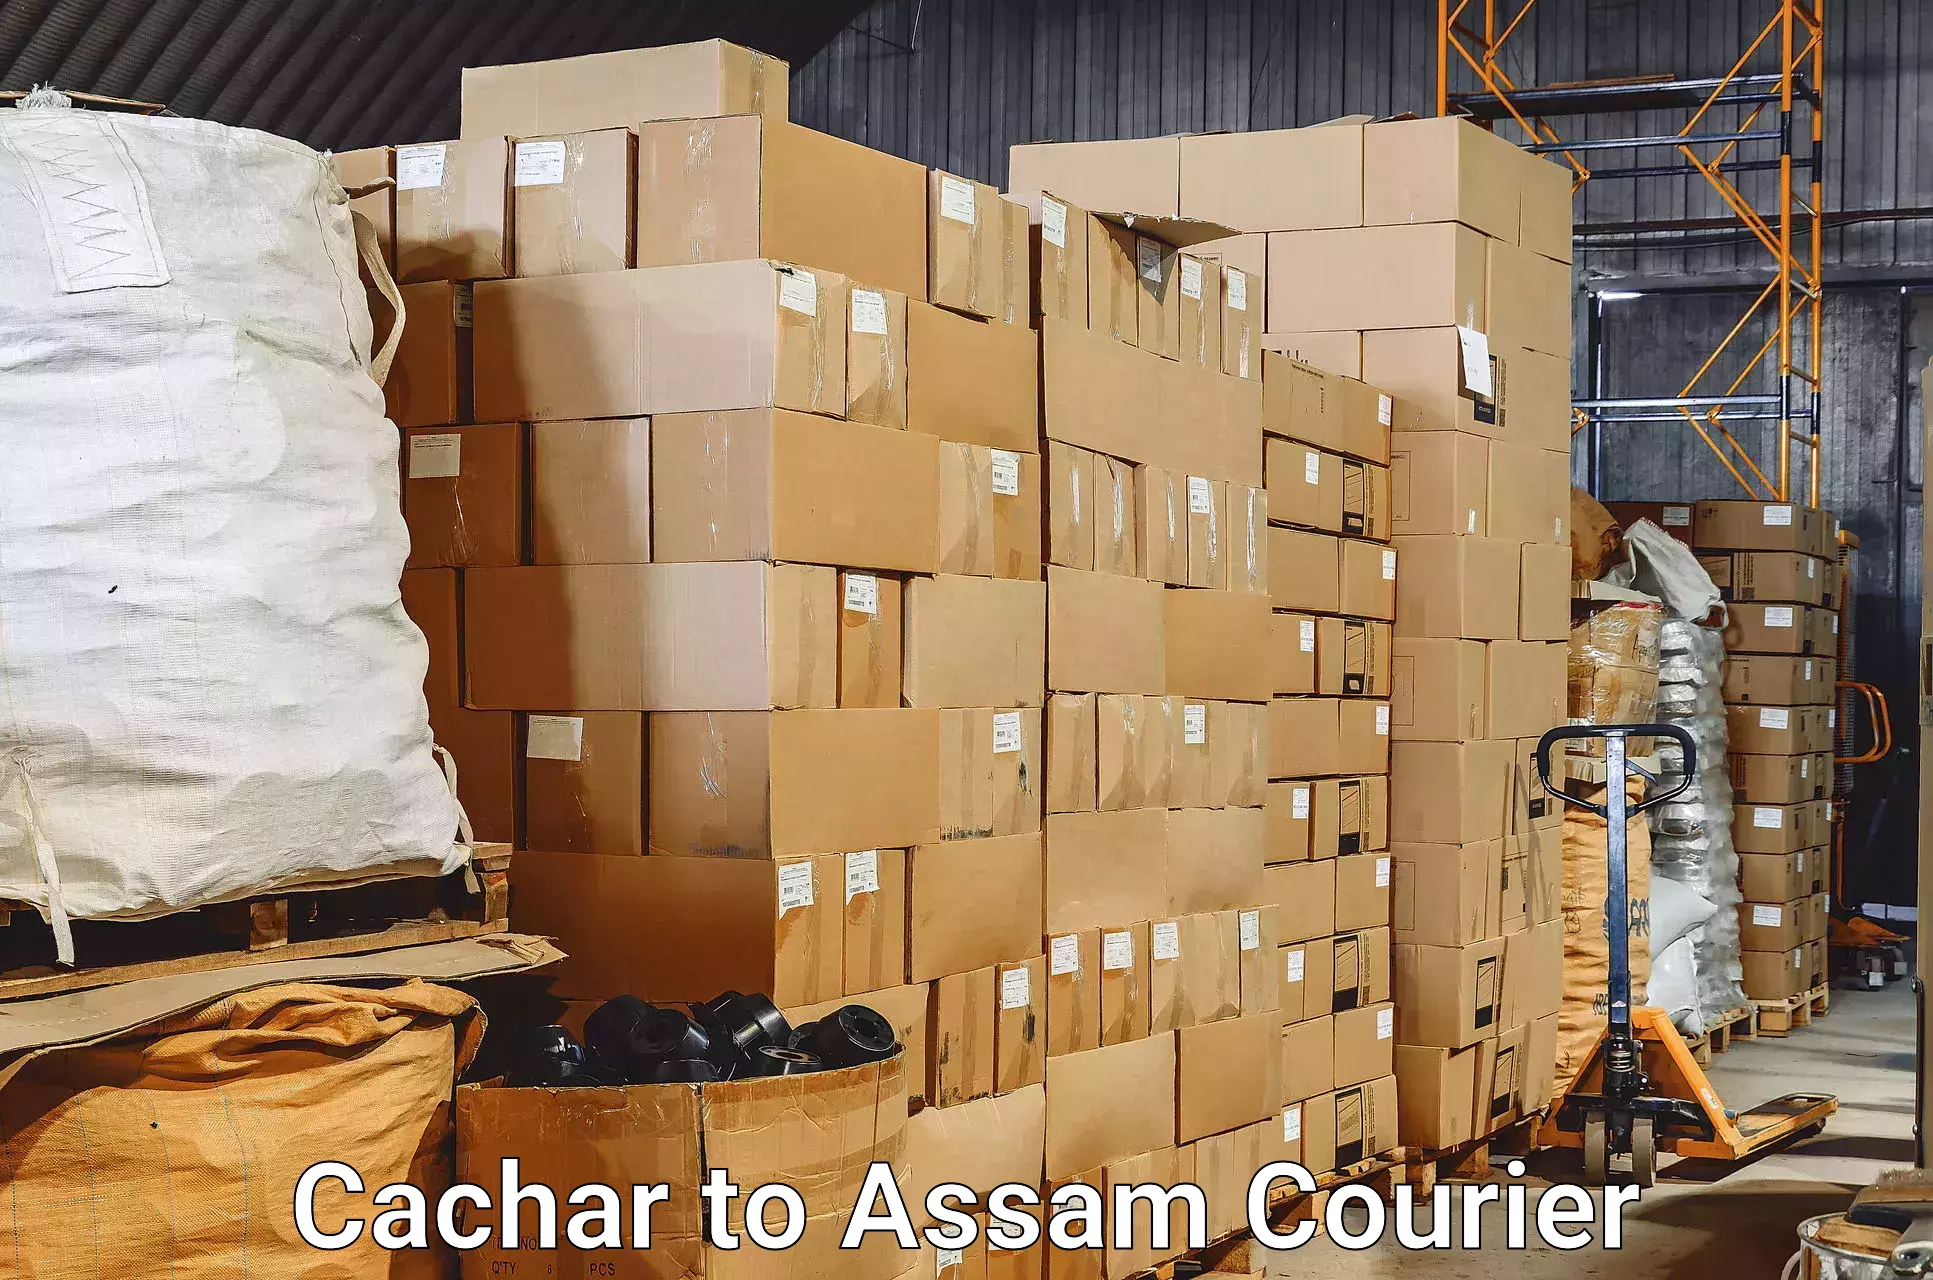 Luggage shipment processing Cachar to Diphu